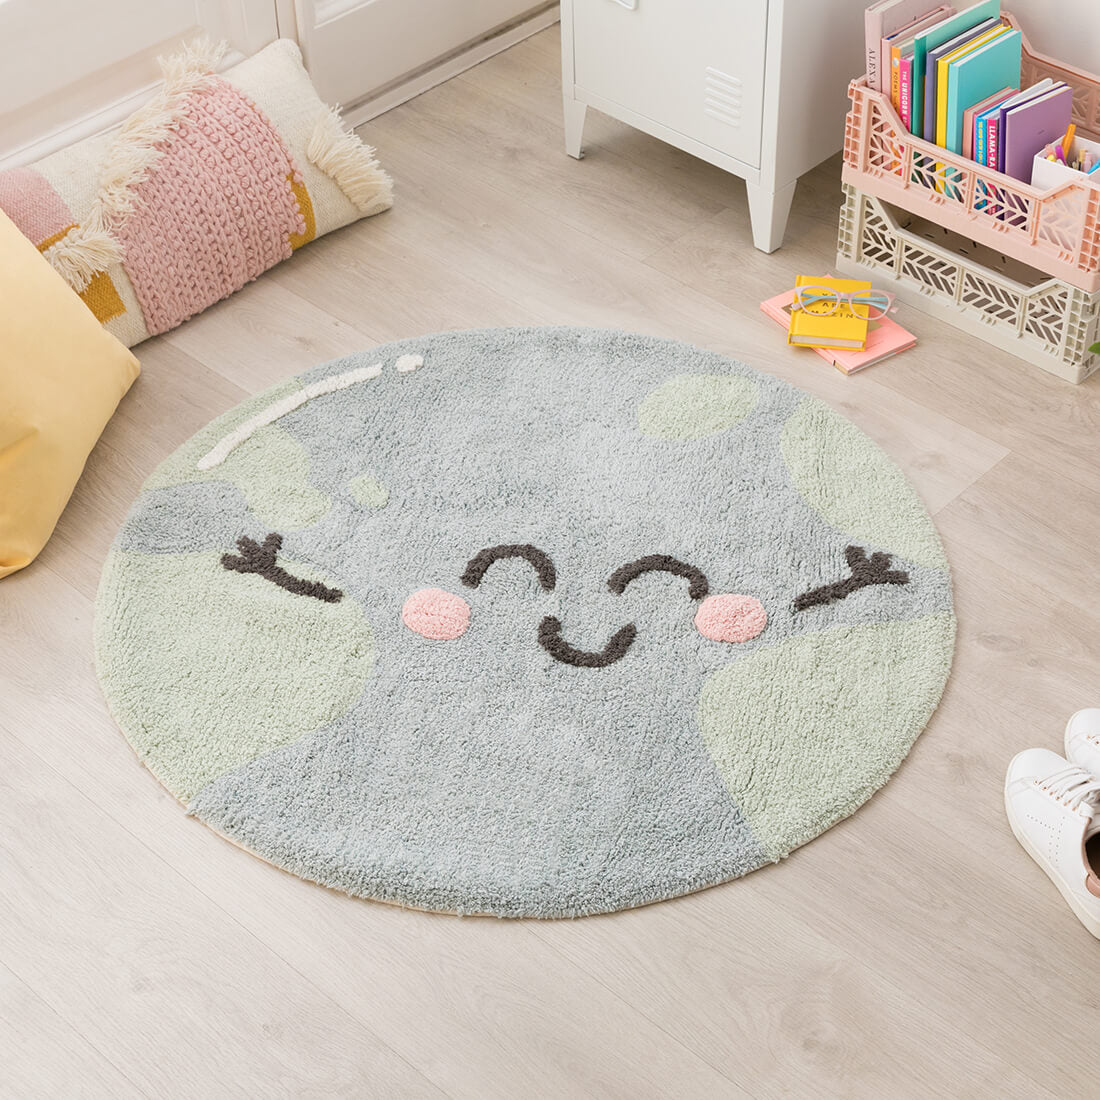  cotton tufted round rug shaped as a smiling globe